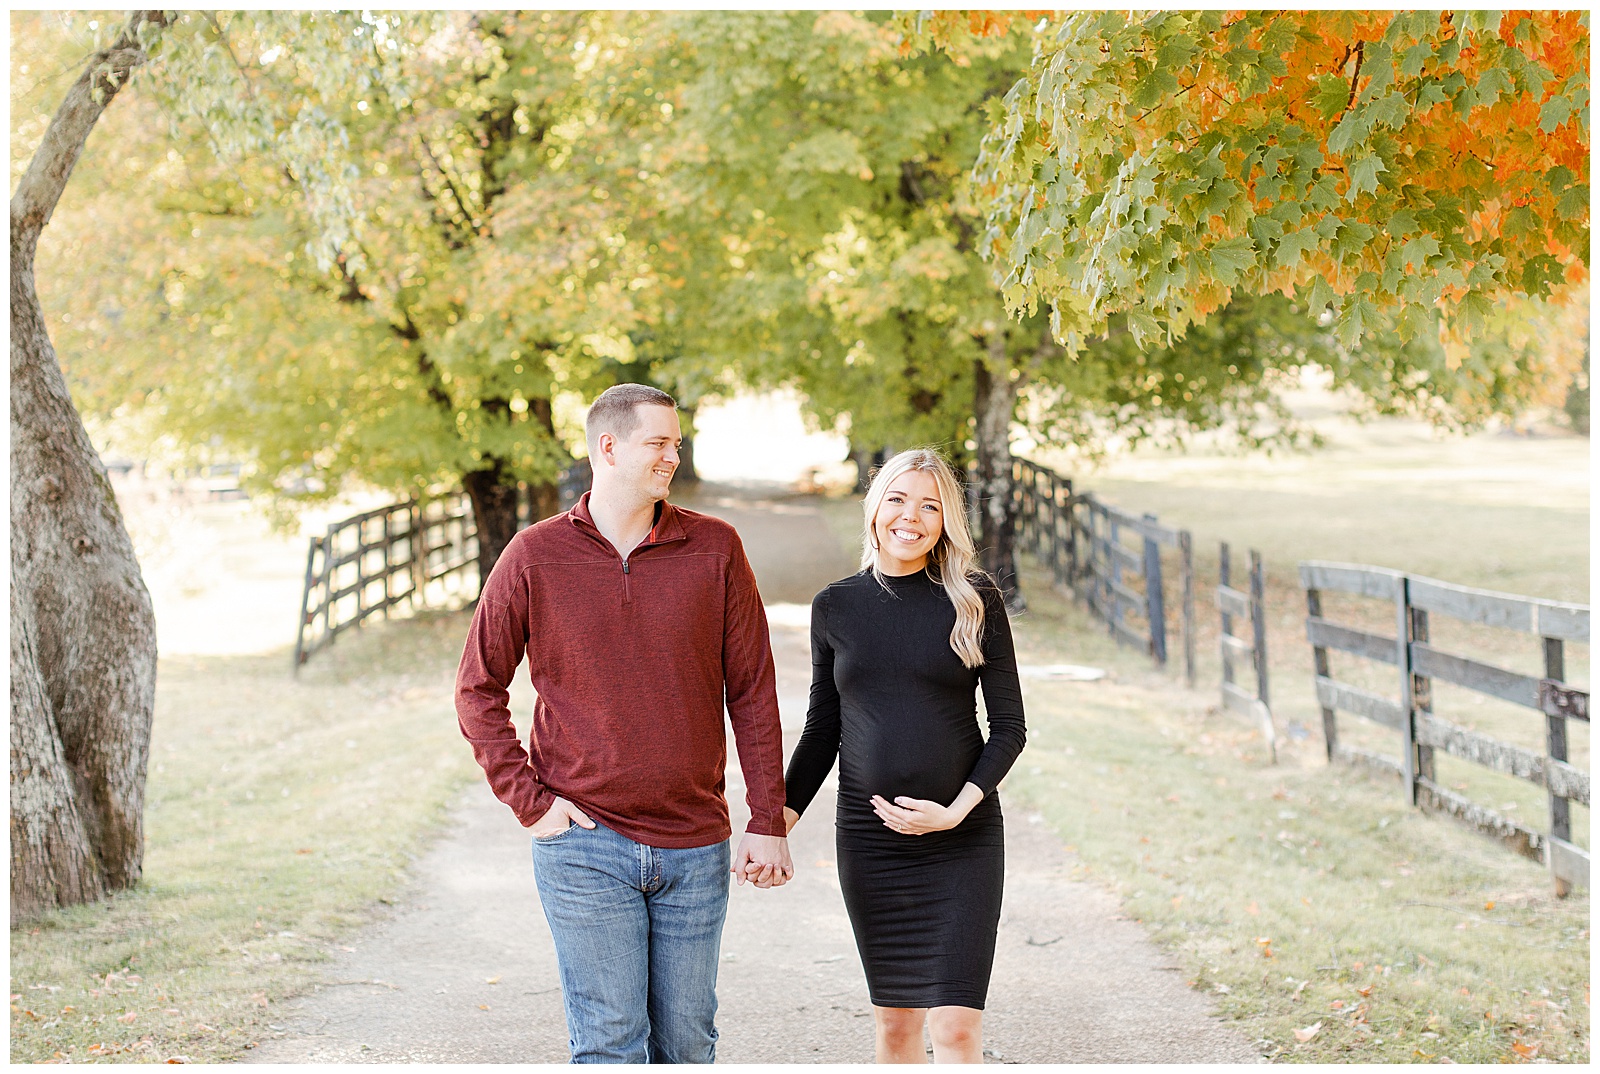 Franklin maternity session